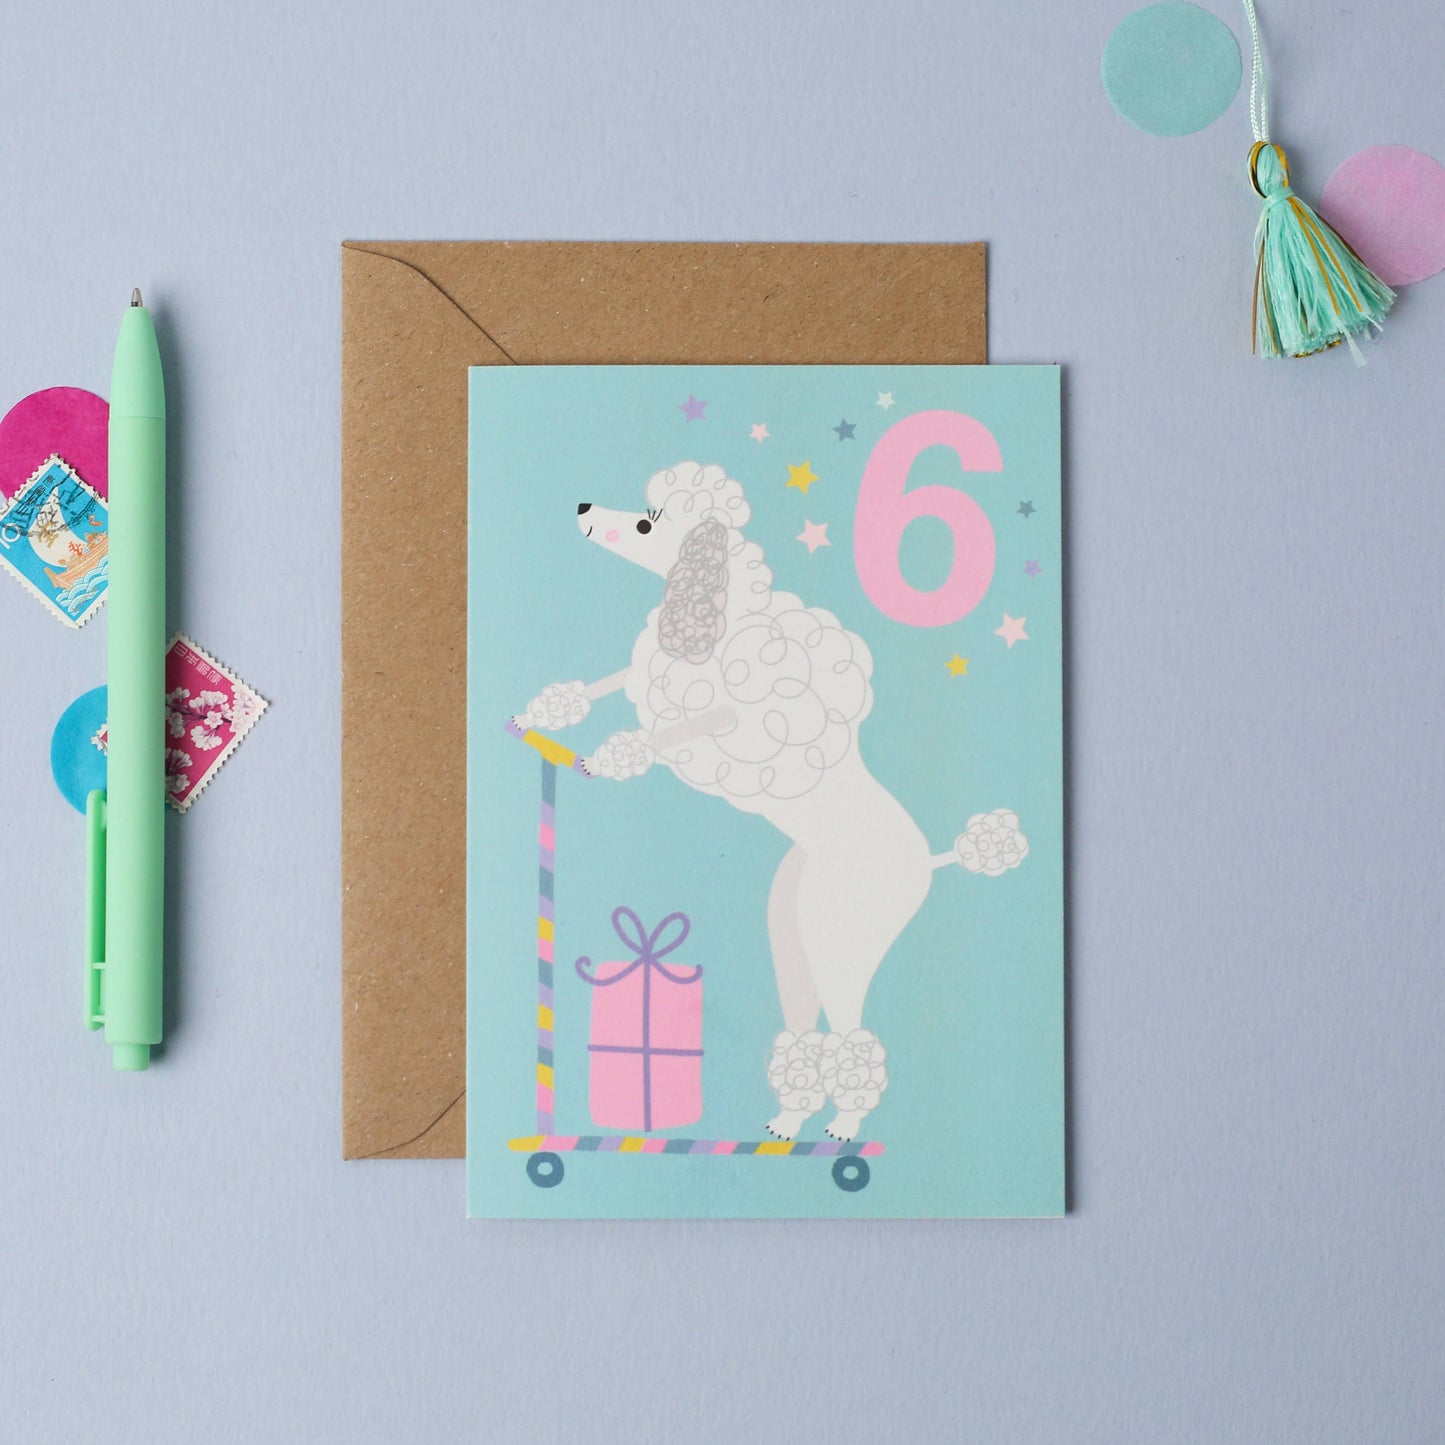 Age 6 Poodle Birthday Card